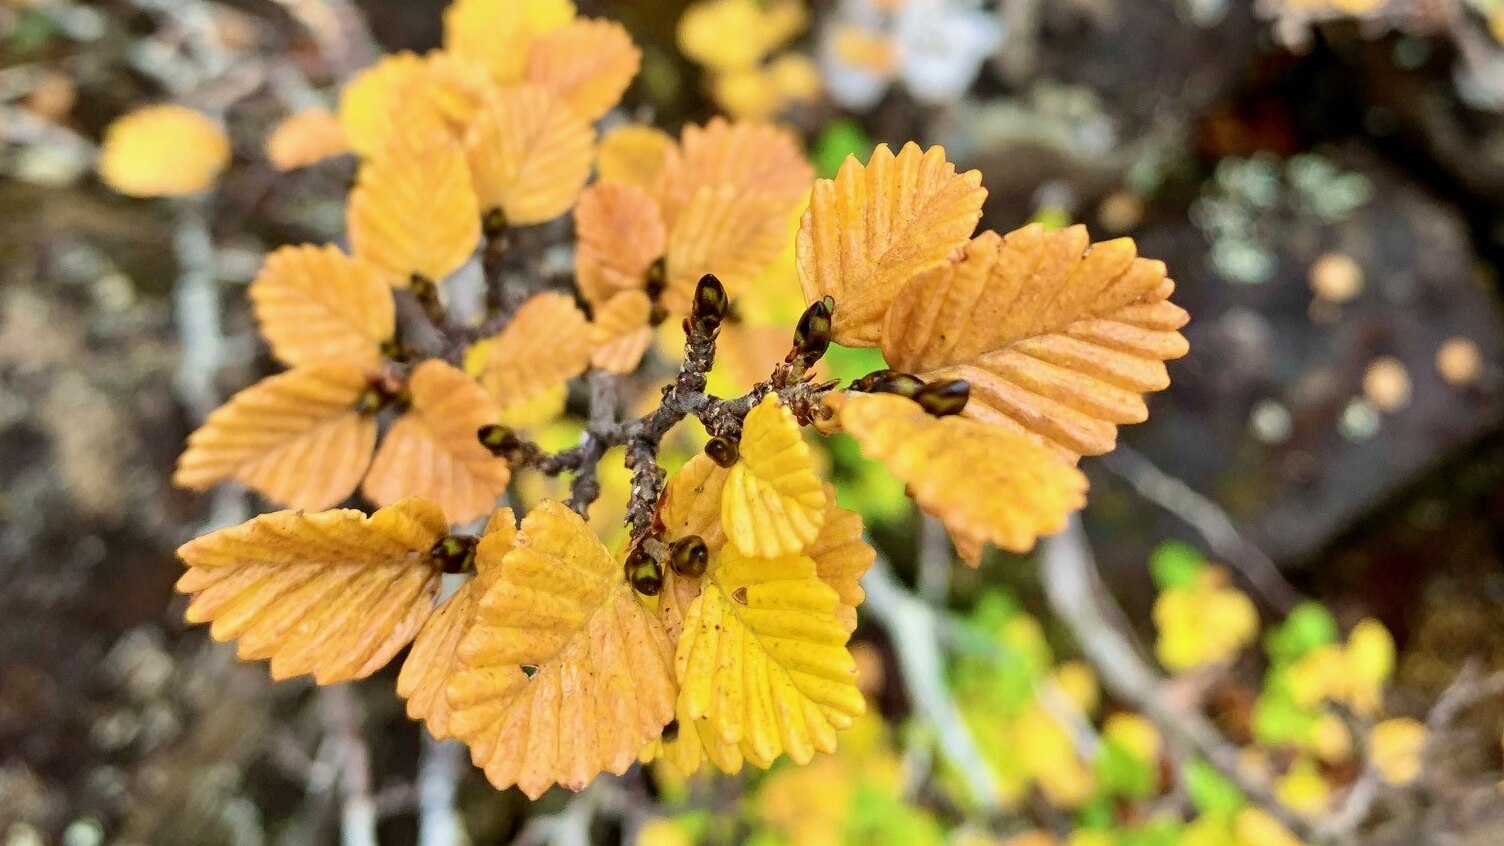 cold climate deciduous tree, the fagus, puts on annual autumn show for sightseers in tasmania